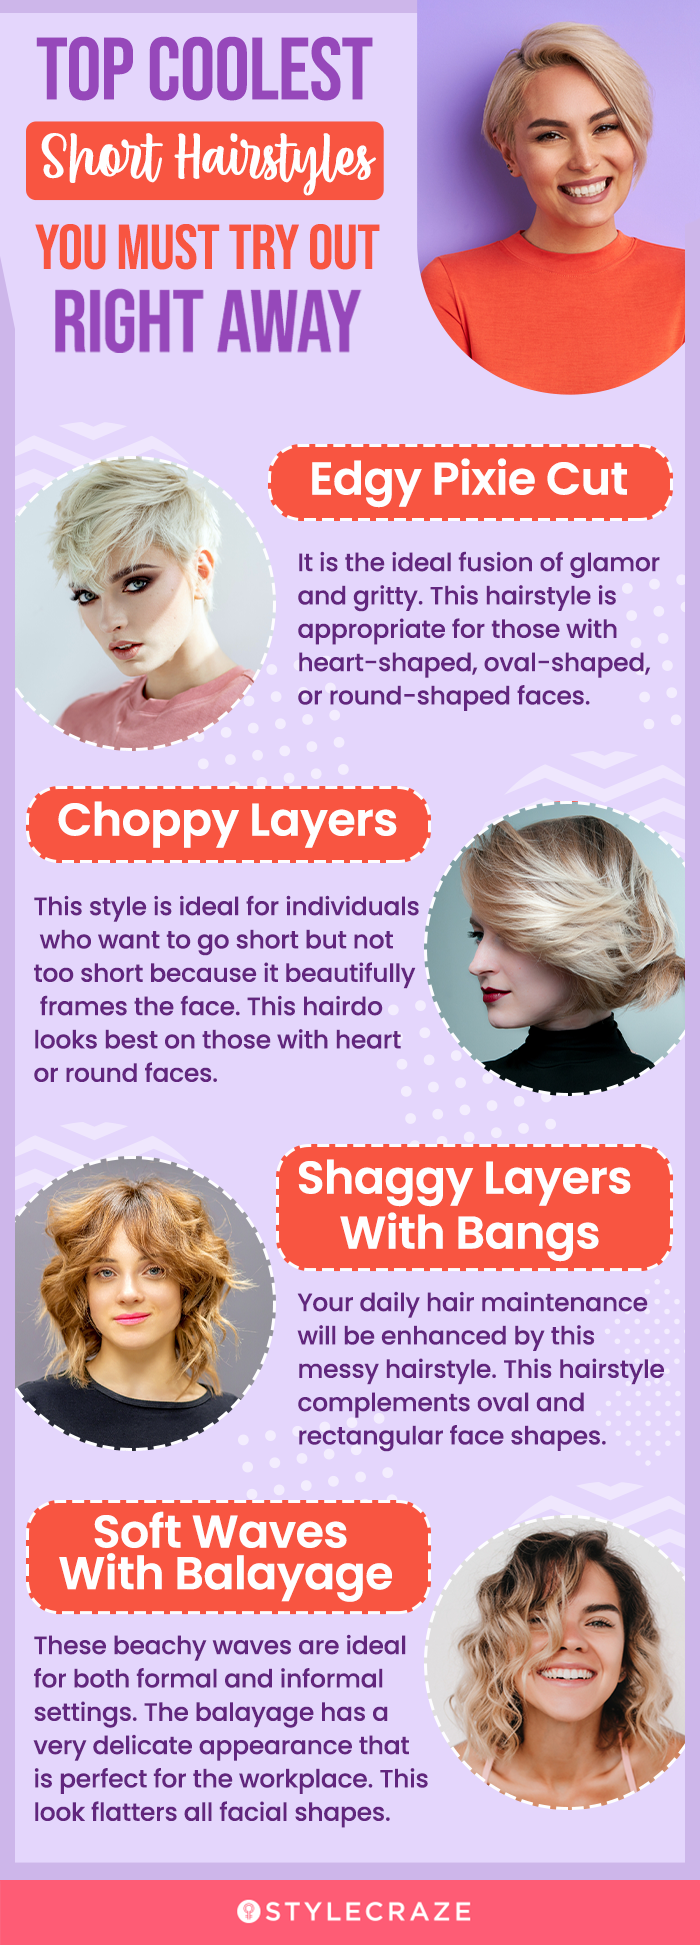 top coolest short hairstyles you must try out right away (infographic)